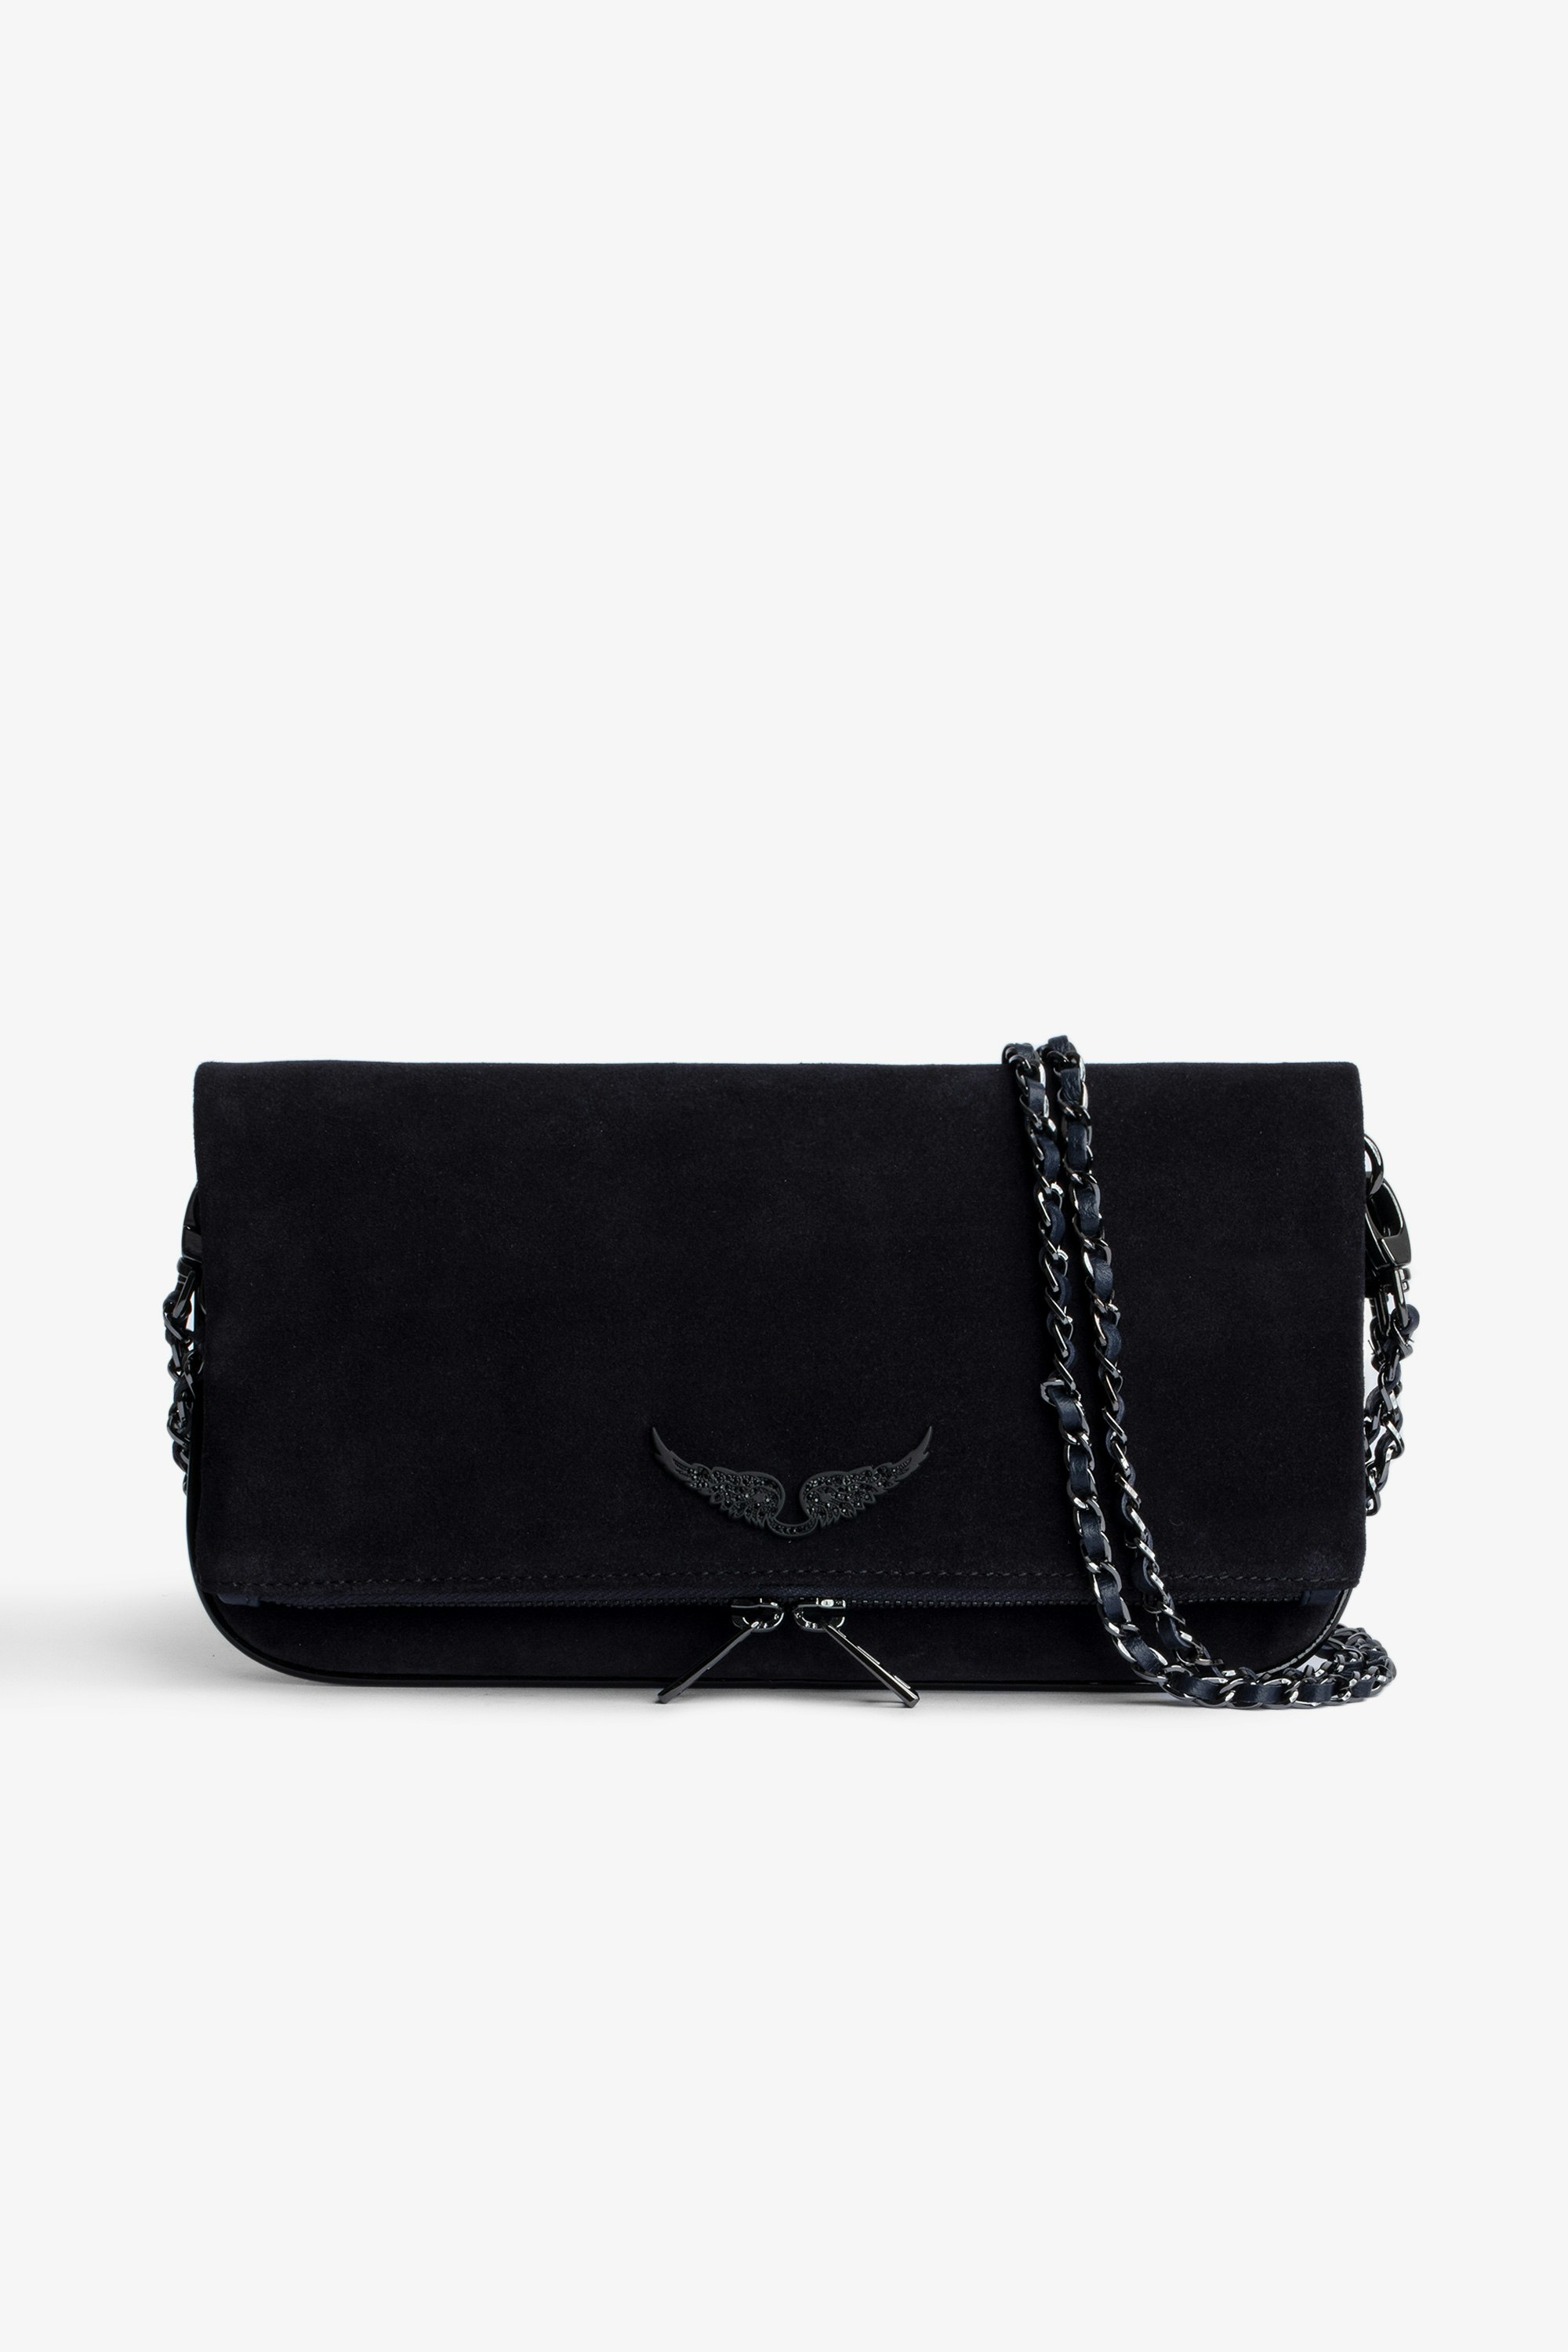 Rock Suede クラッチバッグ Women’s clutch in black and navy blue suede